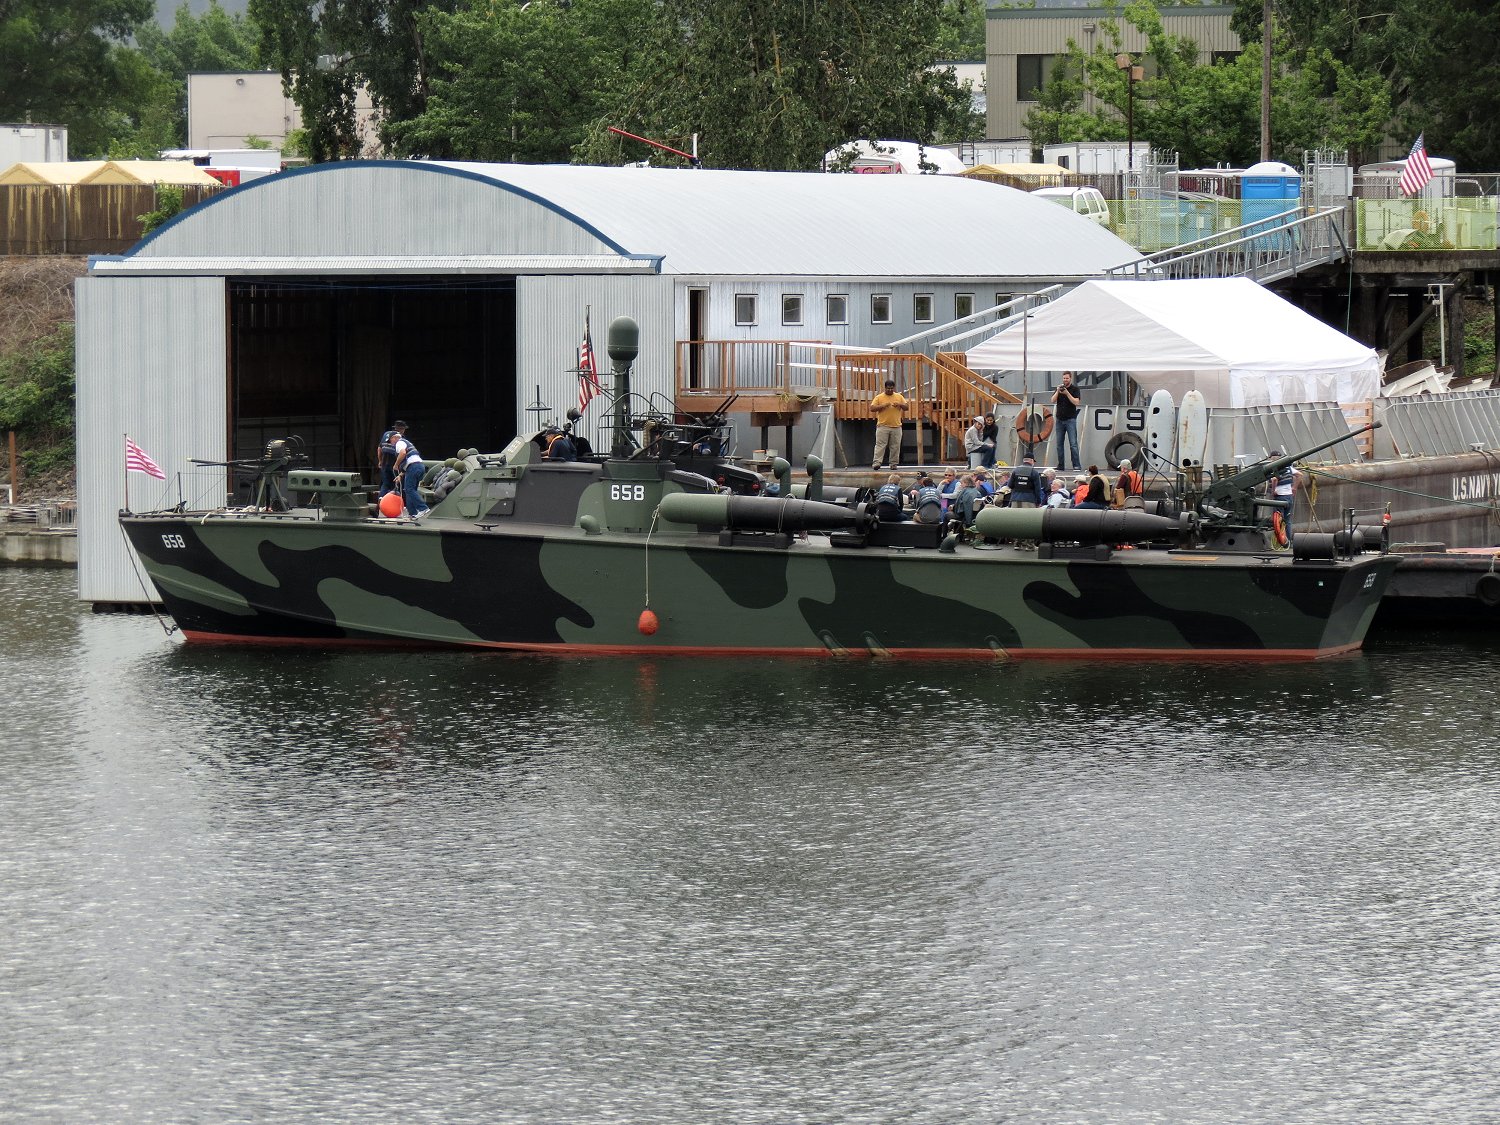 The former PT-658, a 78-foot Higgins boat, restored to factory fresh status by 'Save the PT Boat, Inc.' of Portland, Oregon, United States. 29 Jun 2014 photo.